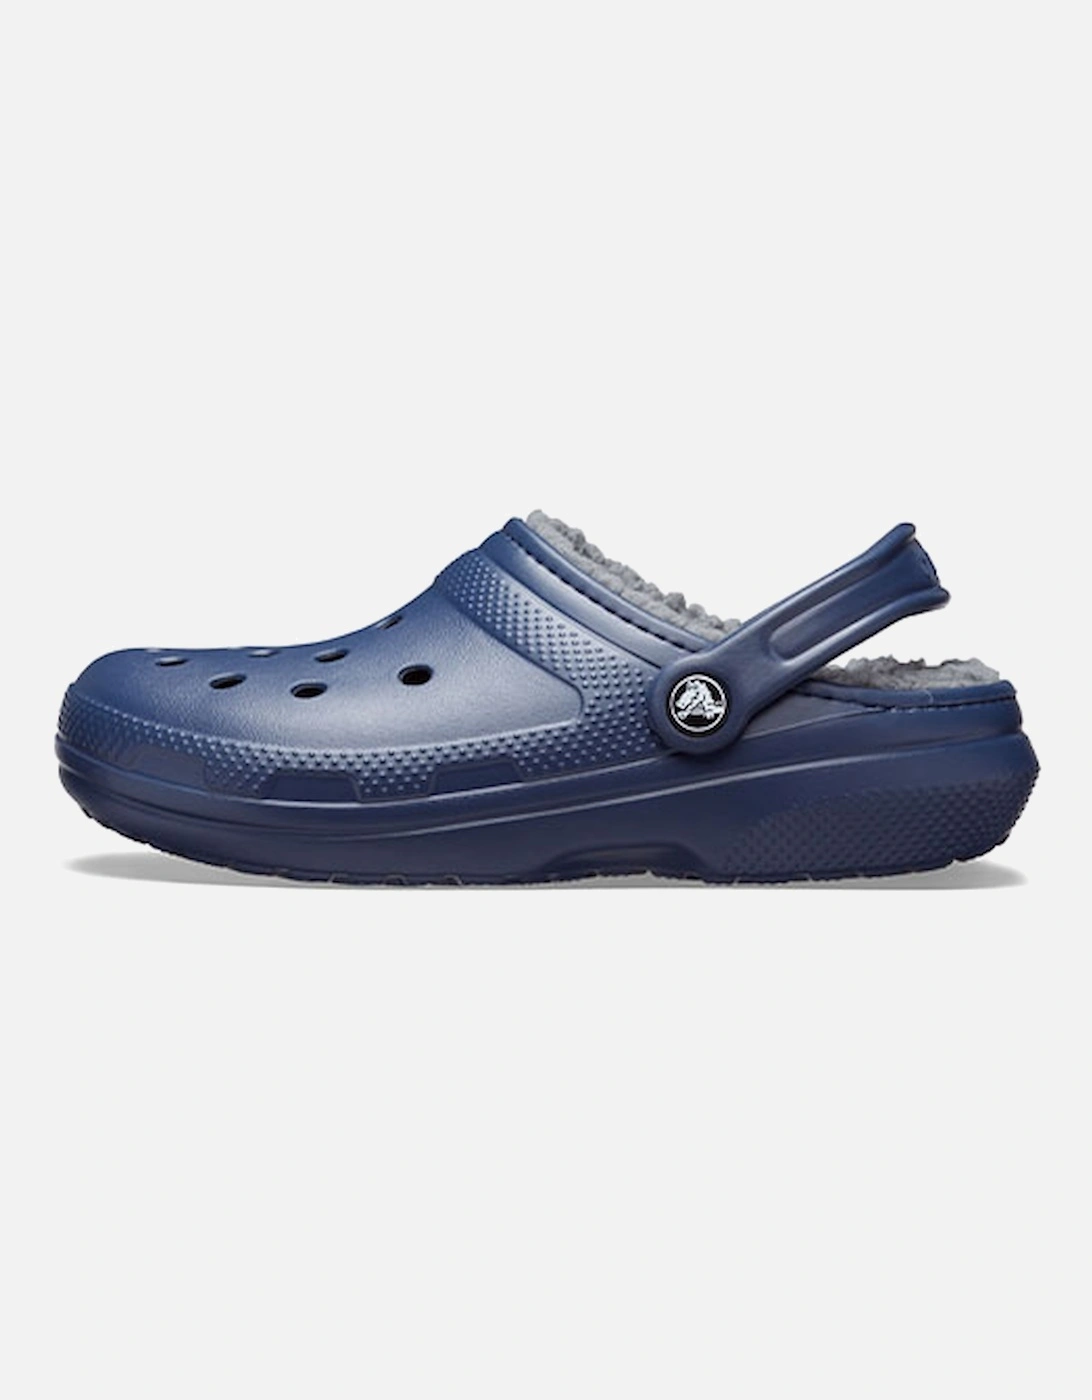 Unisex Classic Lined Clog Navy